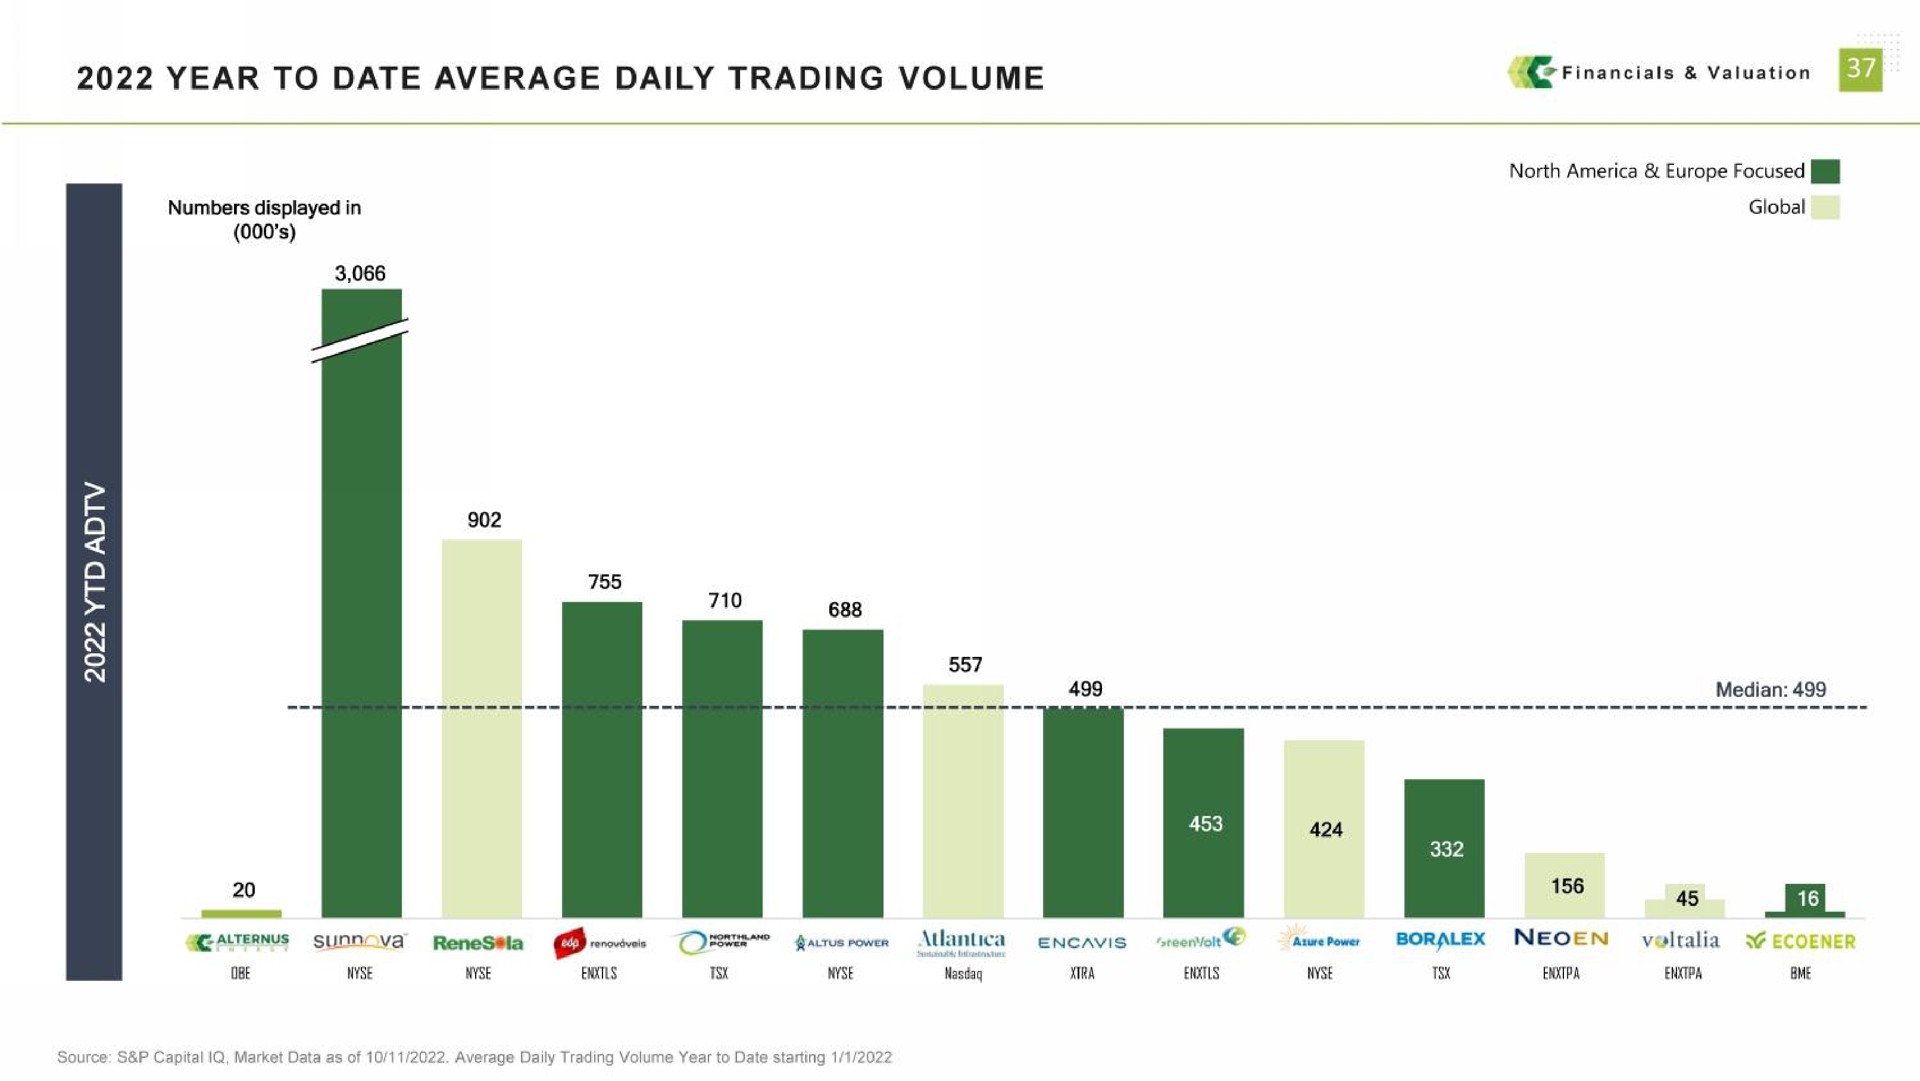 year to date average daily trading volume valuation a | Alternus Energy